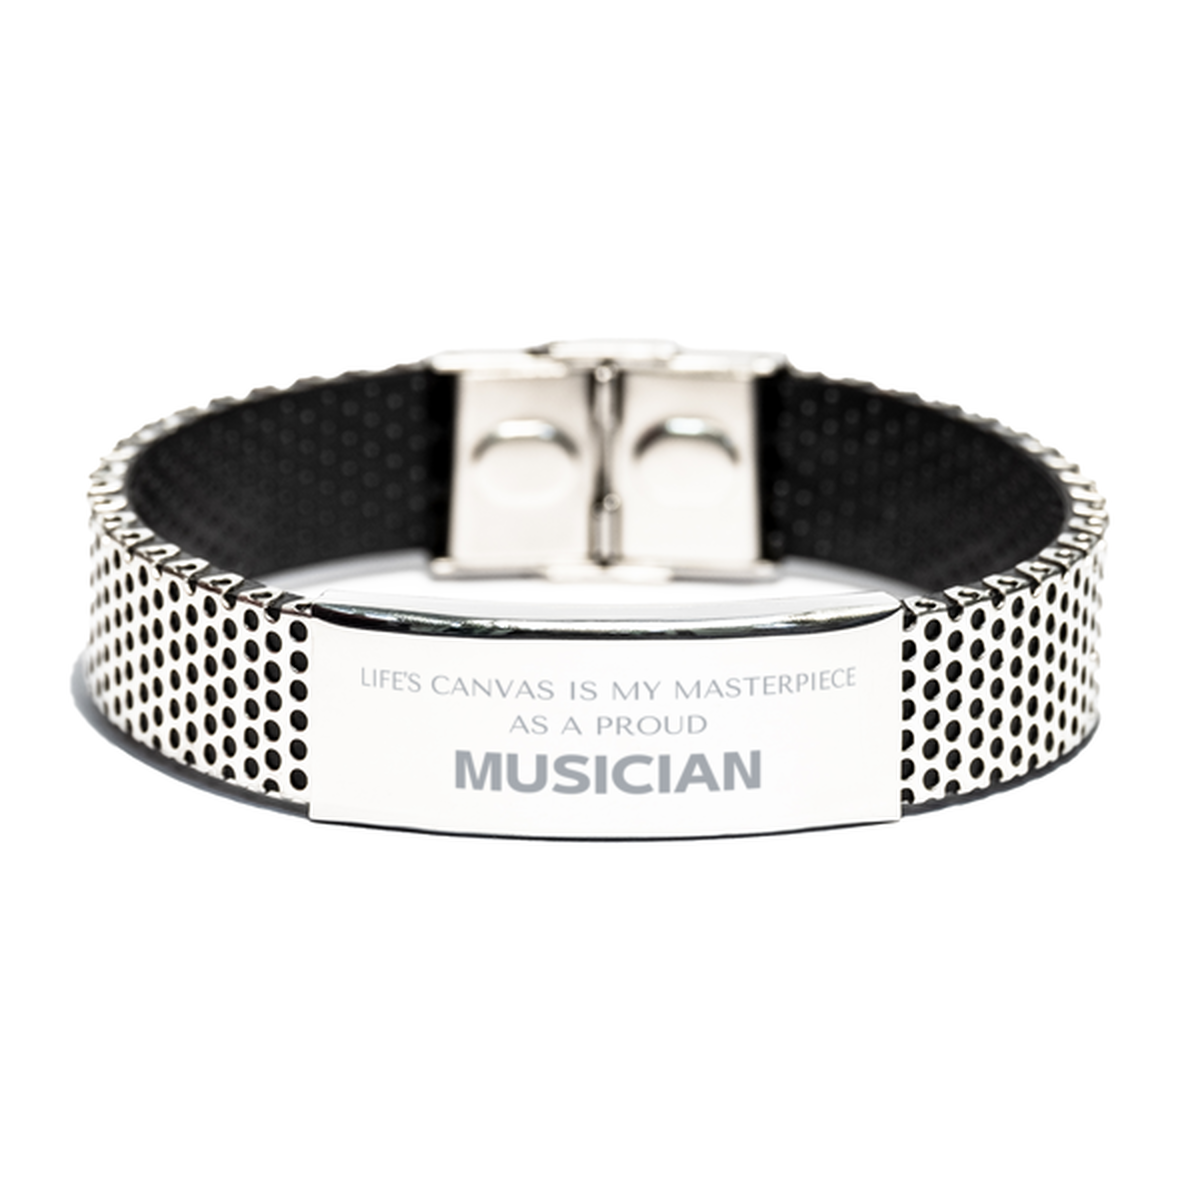 Proud Musician Gifts, Life's canvas is my masterpiece, Epic Birthday Christmas Unique Stainless Steel Bracelet For Musician, Coworkers, Men, Women, Friends